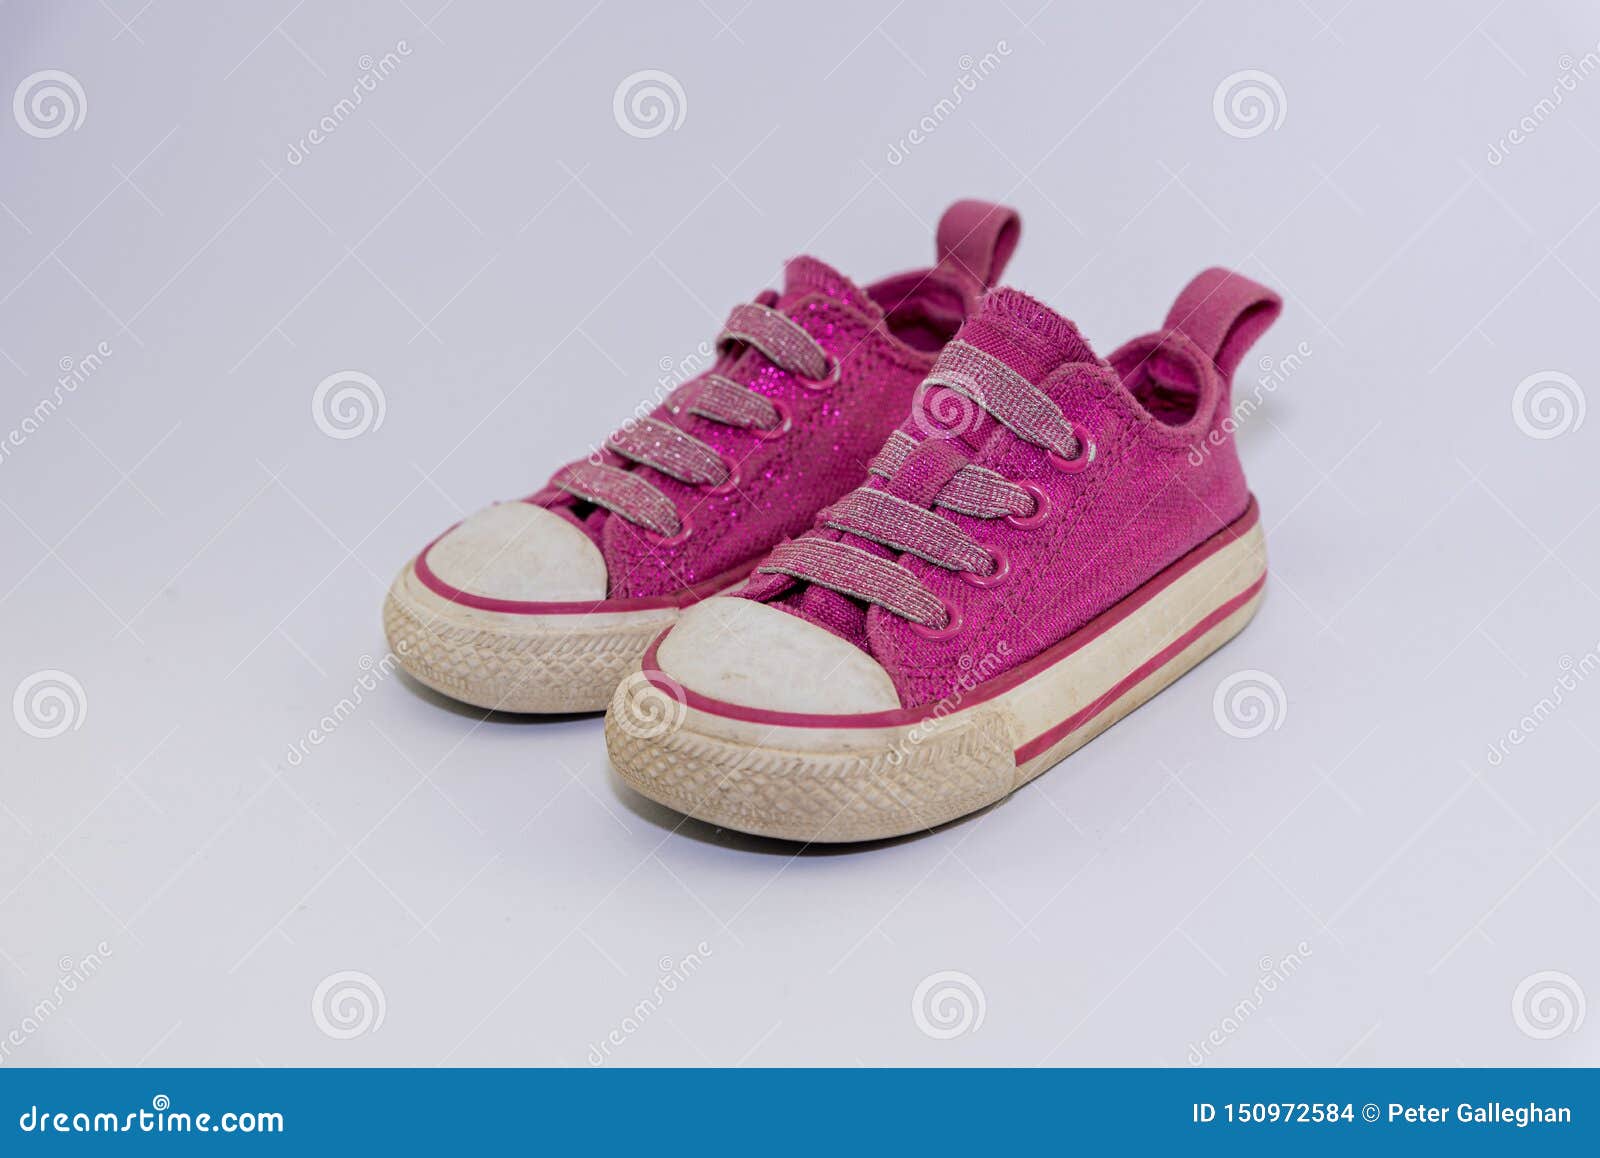 Cute Sparkly Pink Kids Shoes with Laces , Side View Stock Photo - Image ...